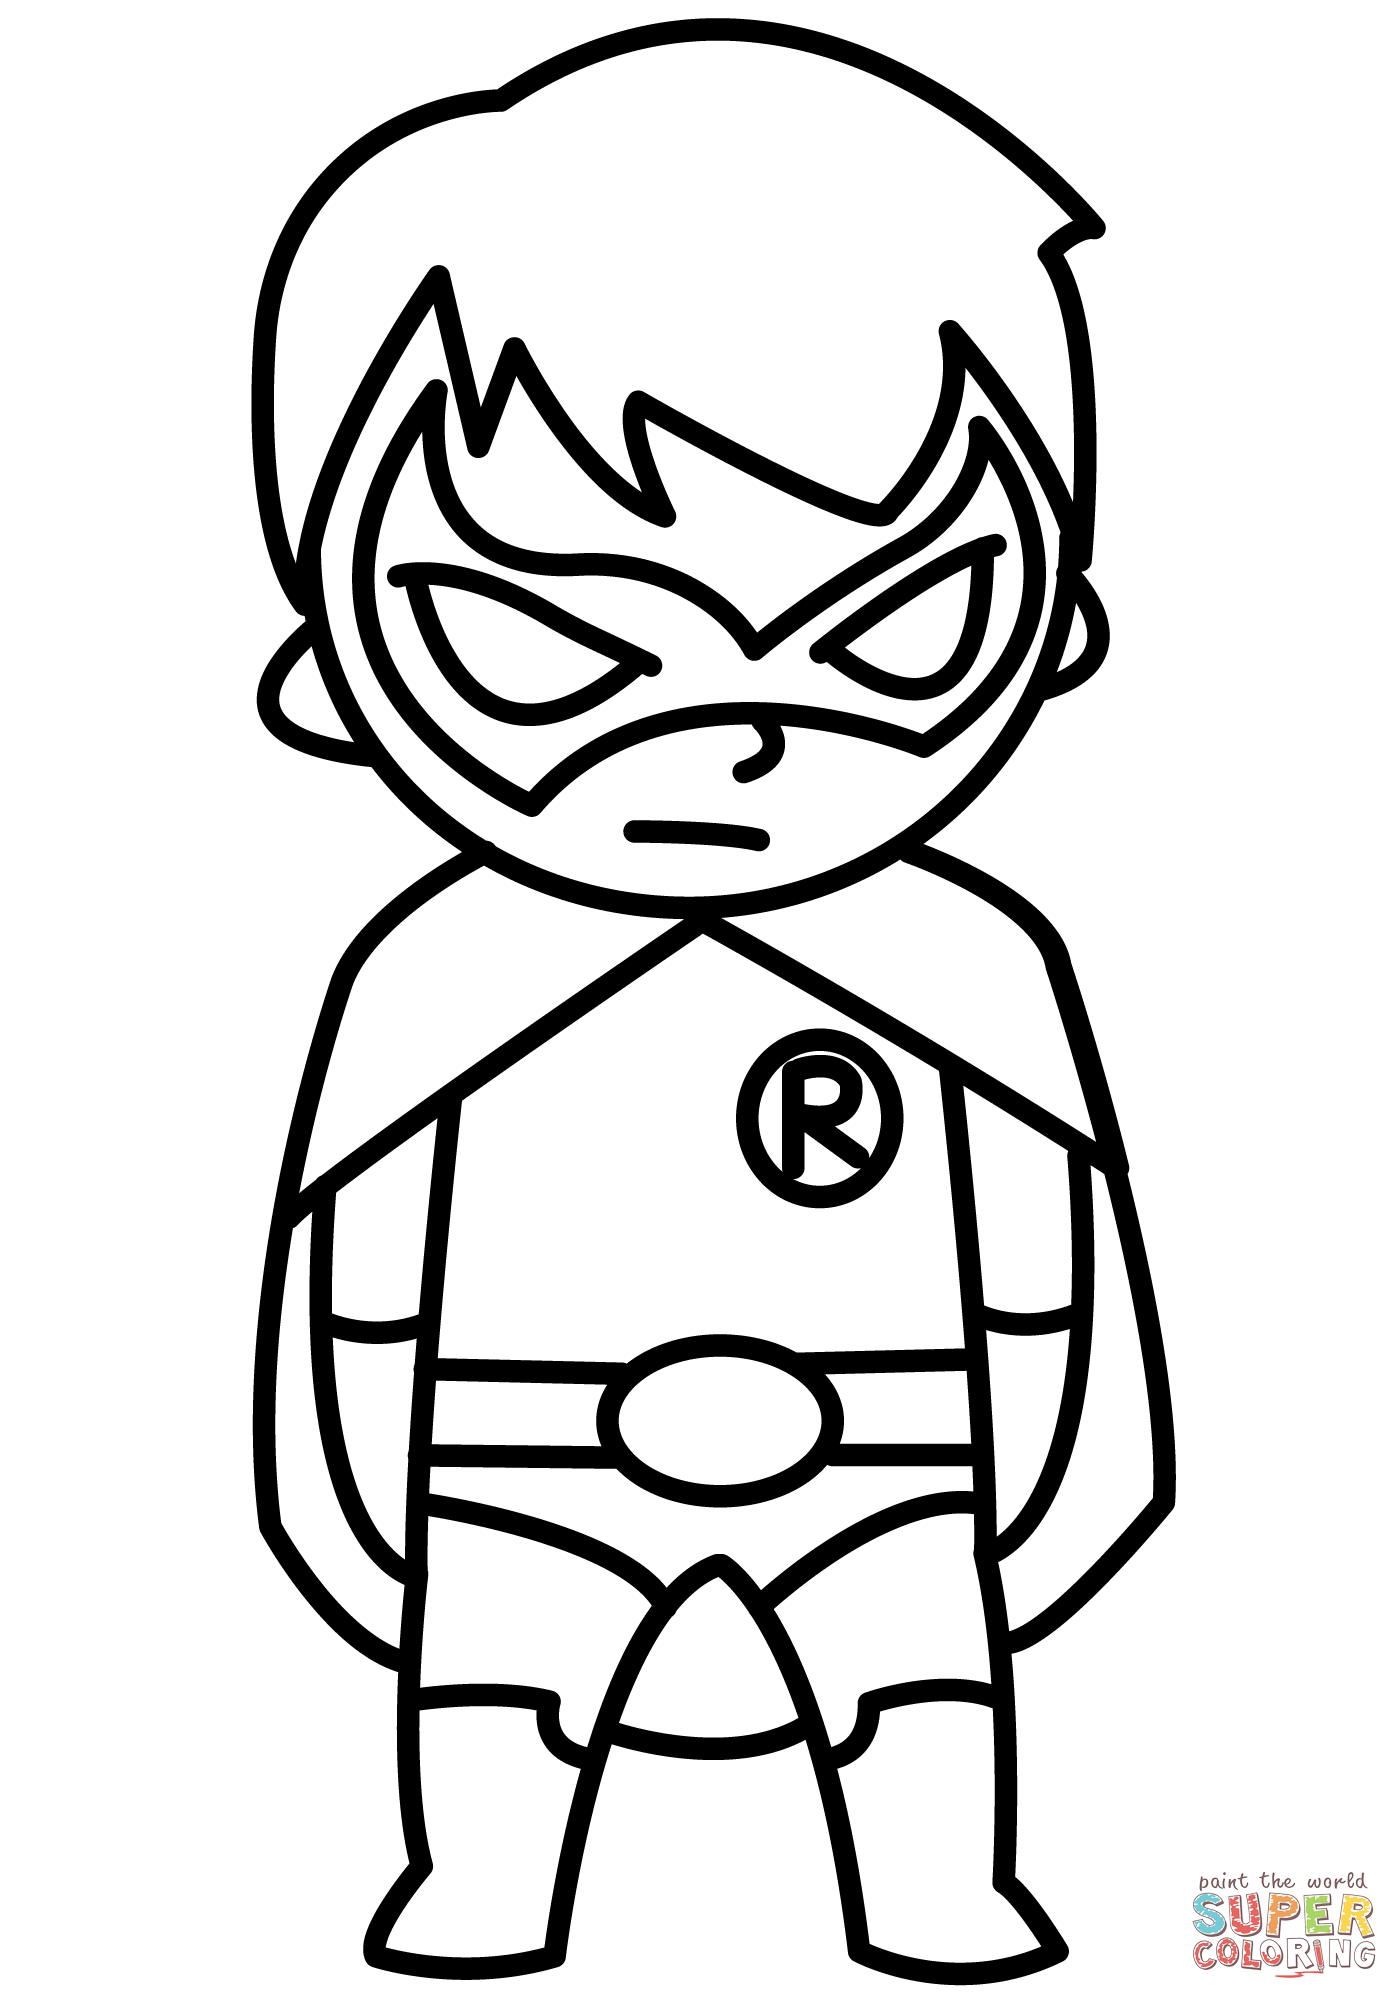 Chibi robin from batman series coloring page free printable coloring pages